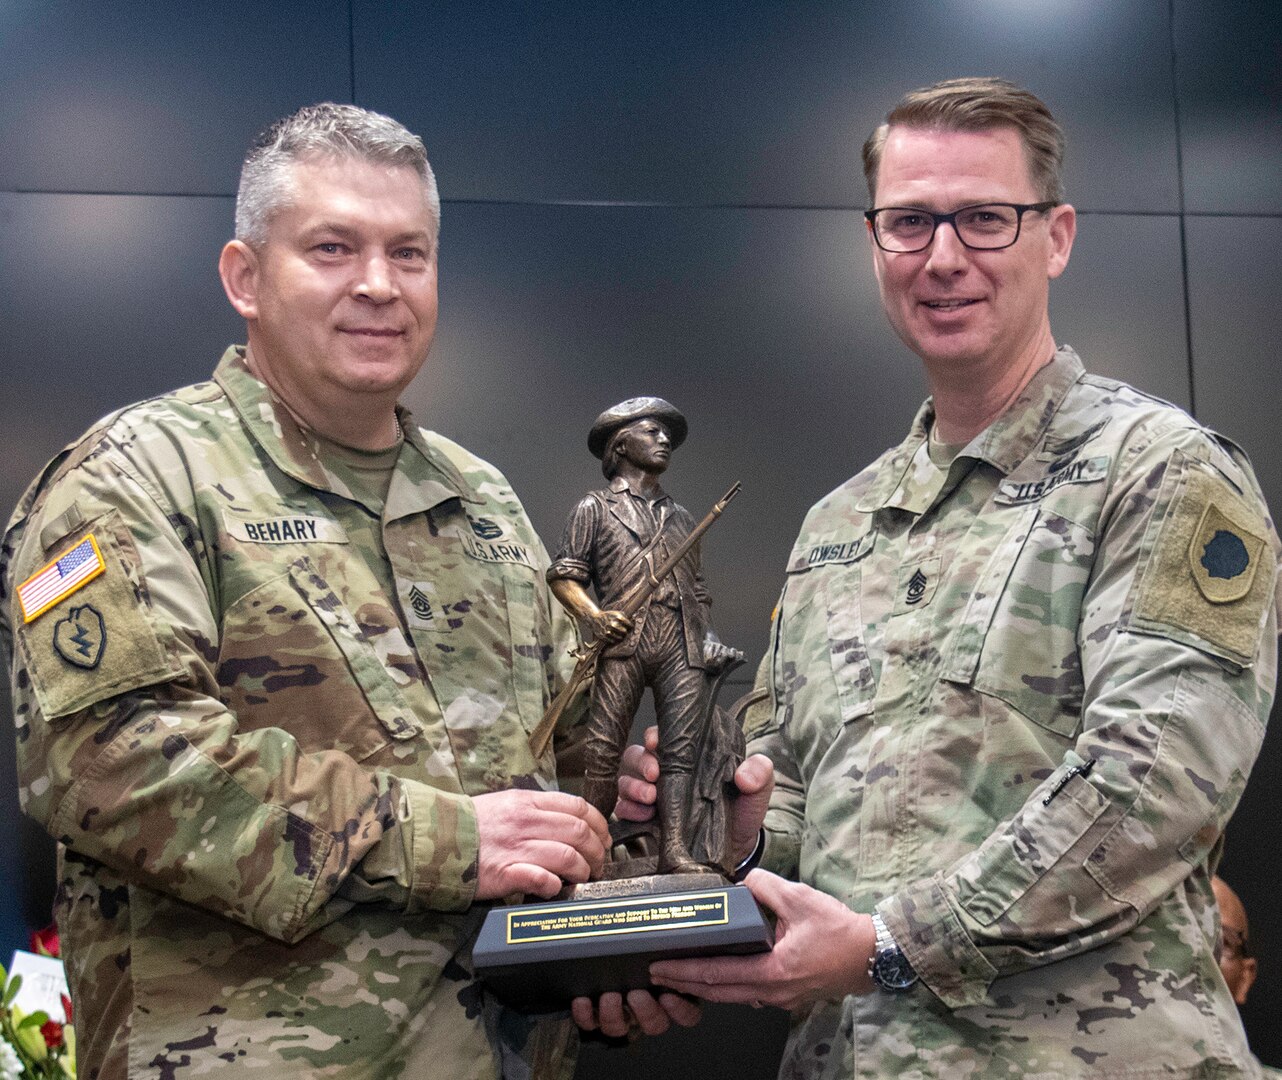 Sgt. Maj. David Owsley, of Forsyth, Illinois, Plans, Operations and Training sergeant major, receives a Minute Man statue from Command Sgt. Maj. Michael Behary, of Sherman, State Command Sergeant Major, in honor of his retirement after nearly 33 years of service in the Illinois Army National Guard.